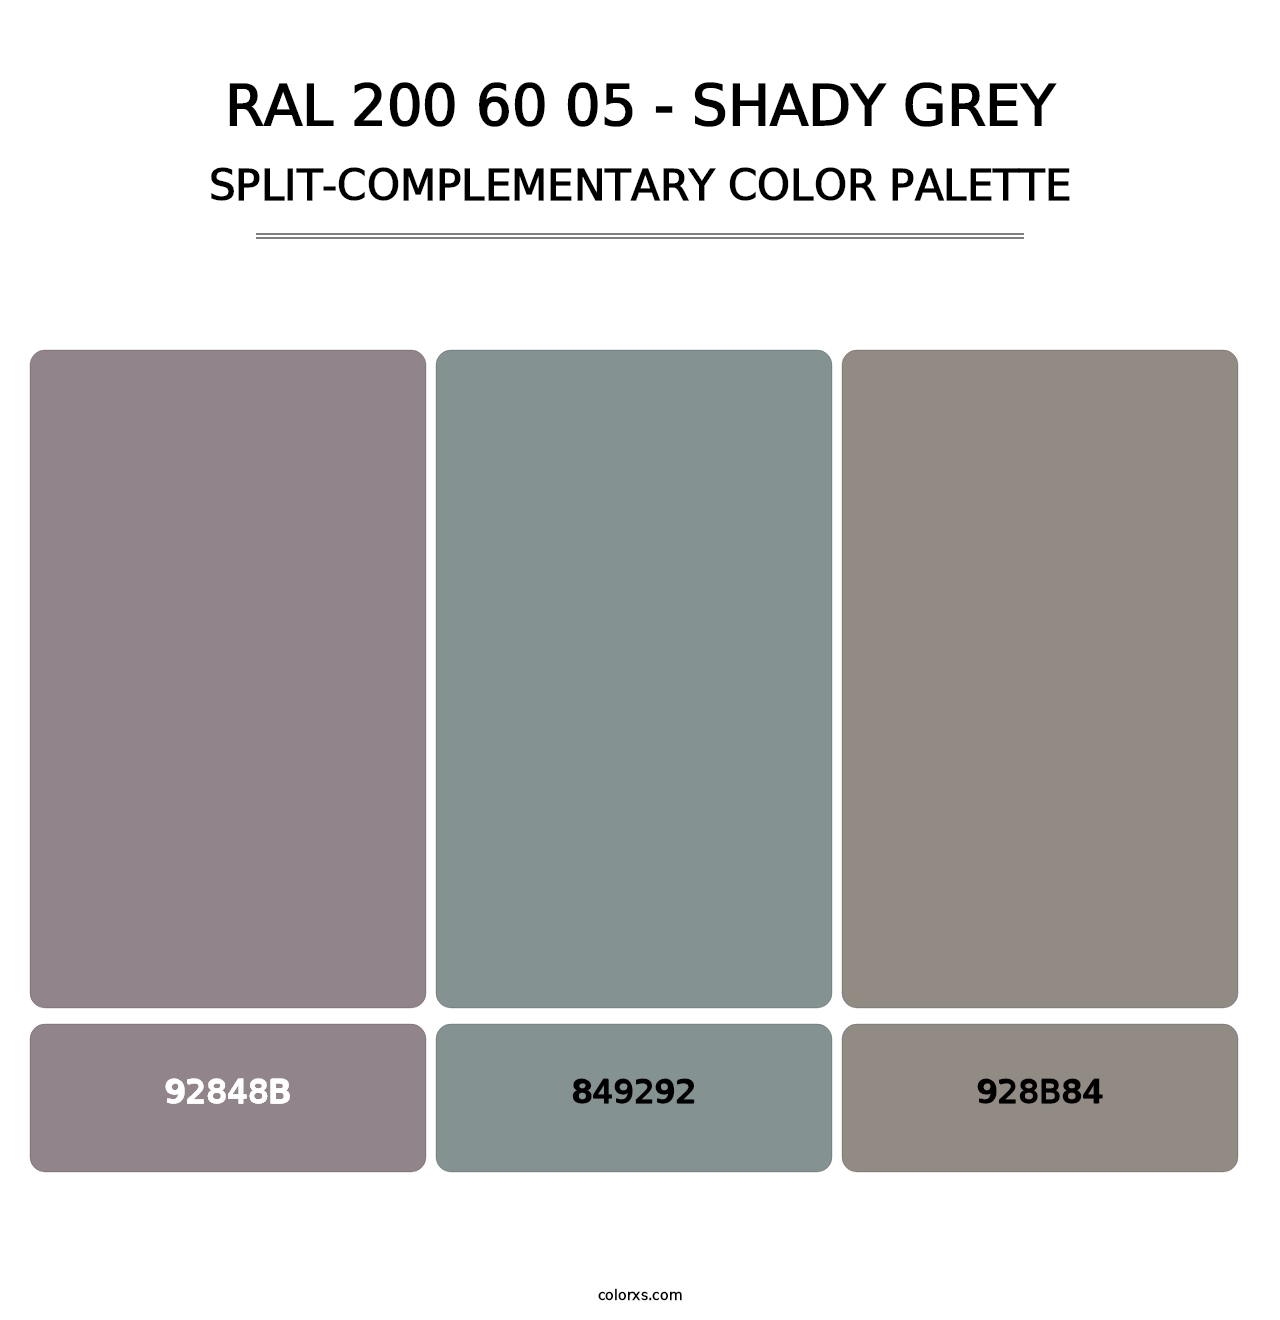 RAL 200 60 05 - Shady Grey - Split-Complementary Color Palette